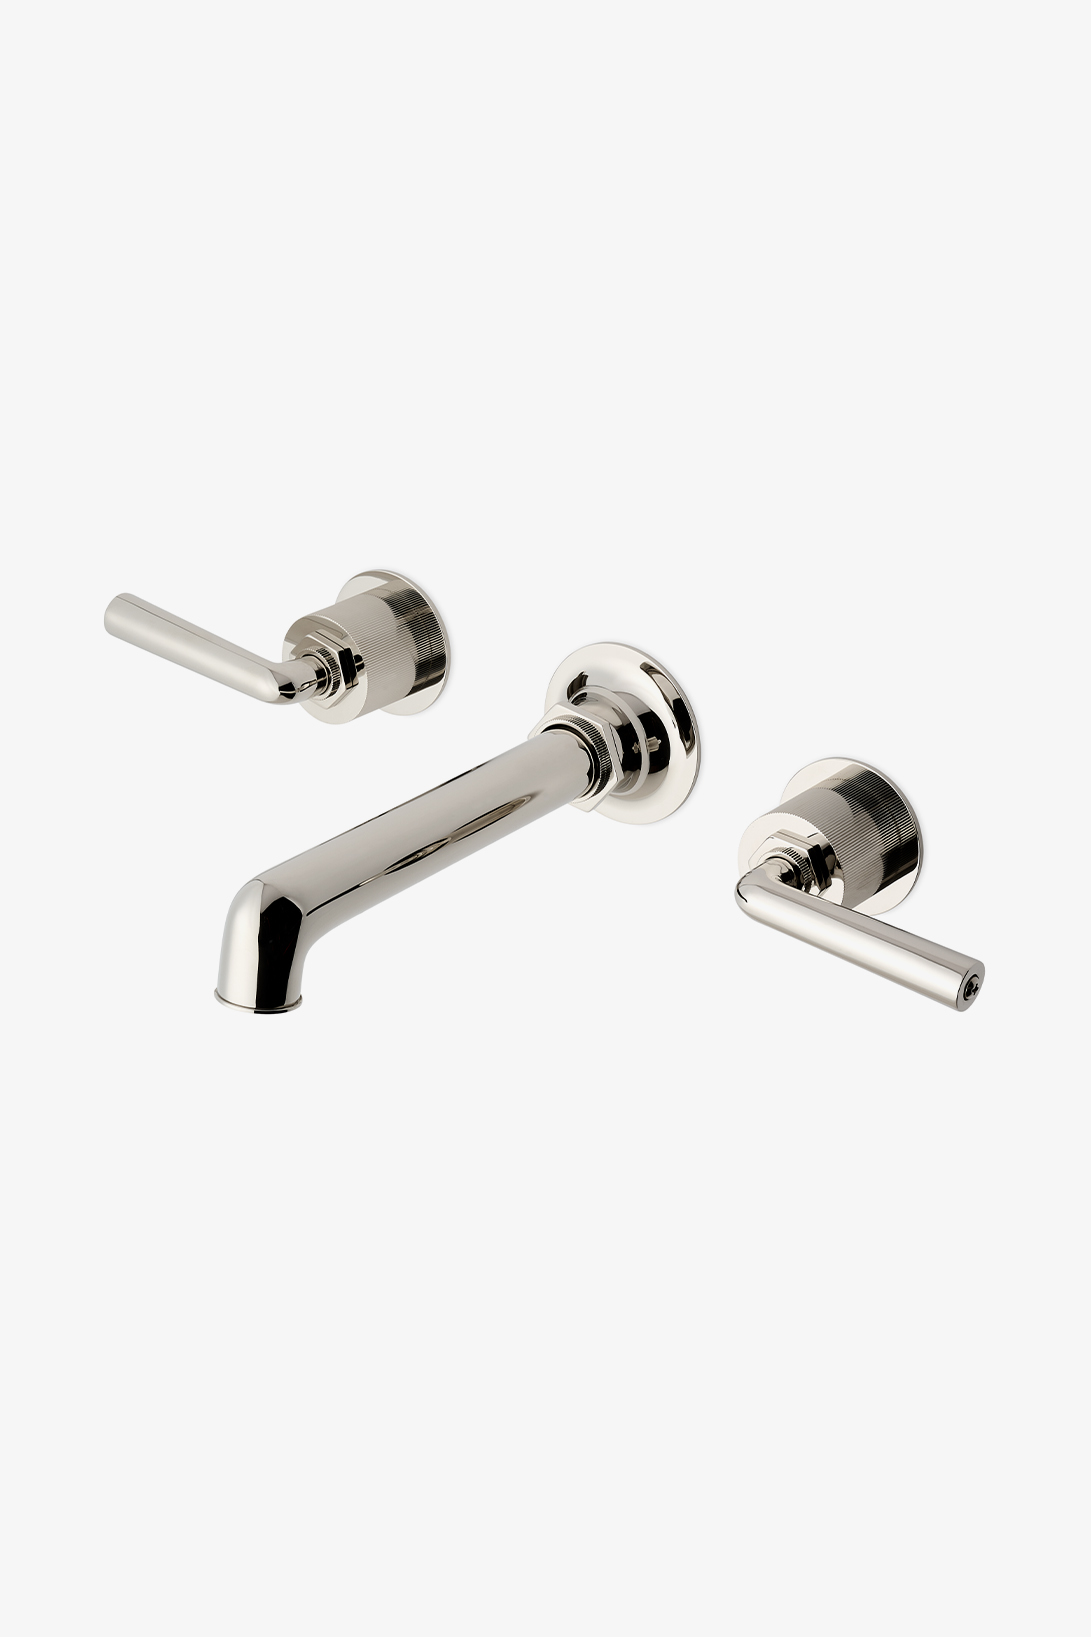 Henry Lavatory Faucet Coin Edge Lever